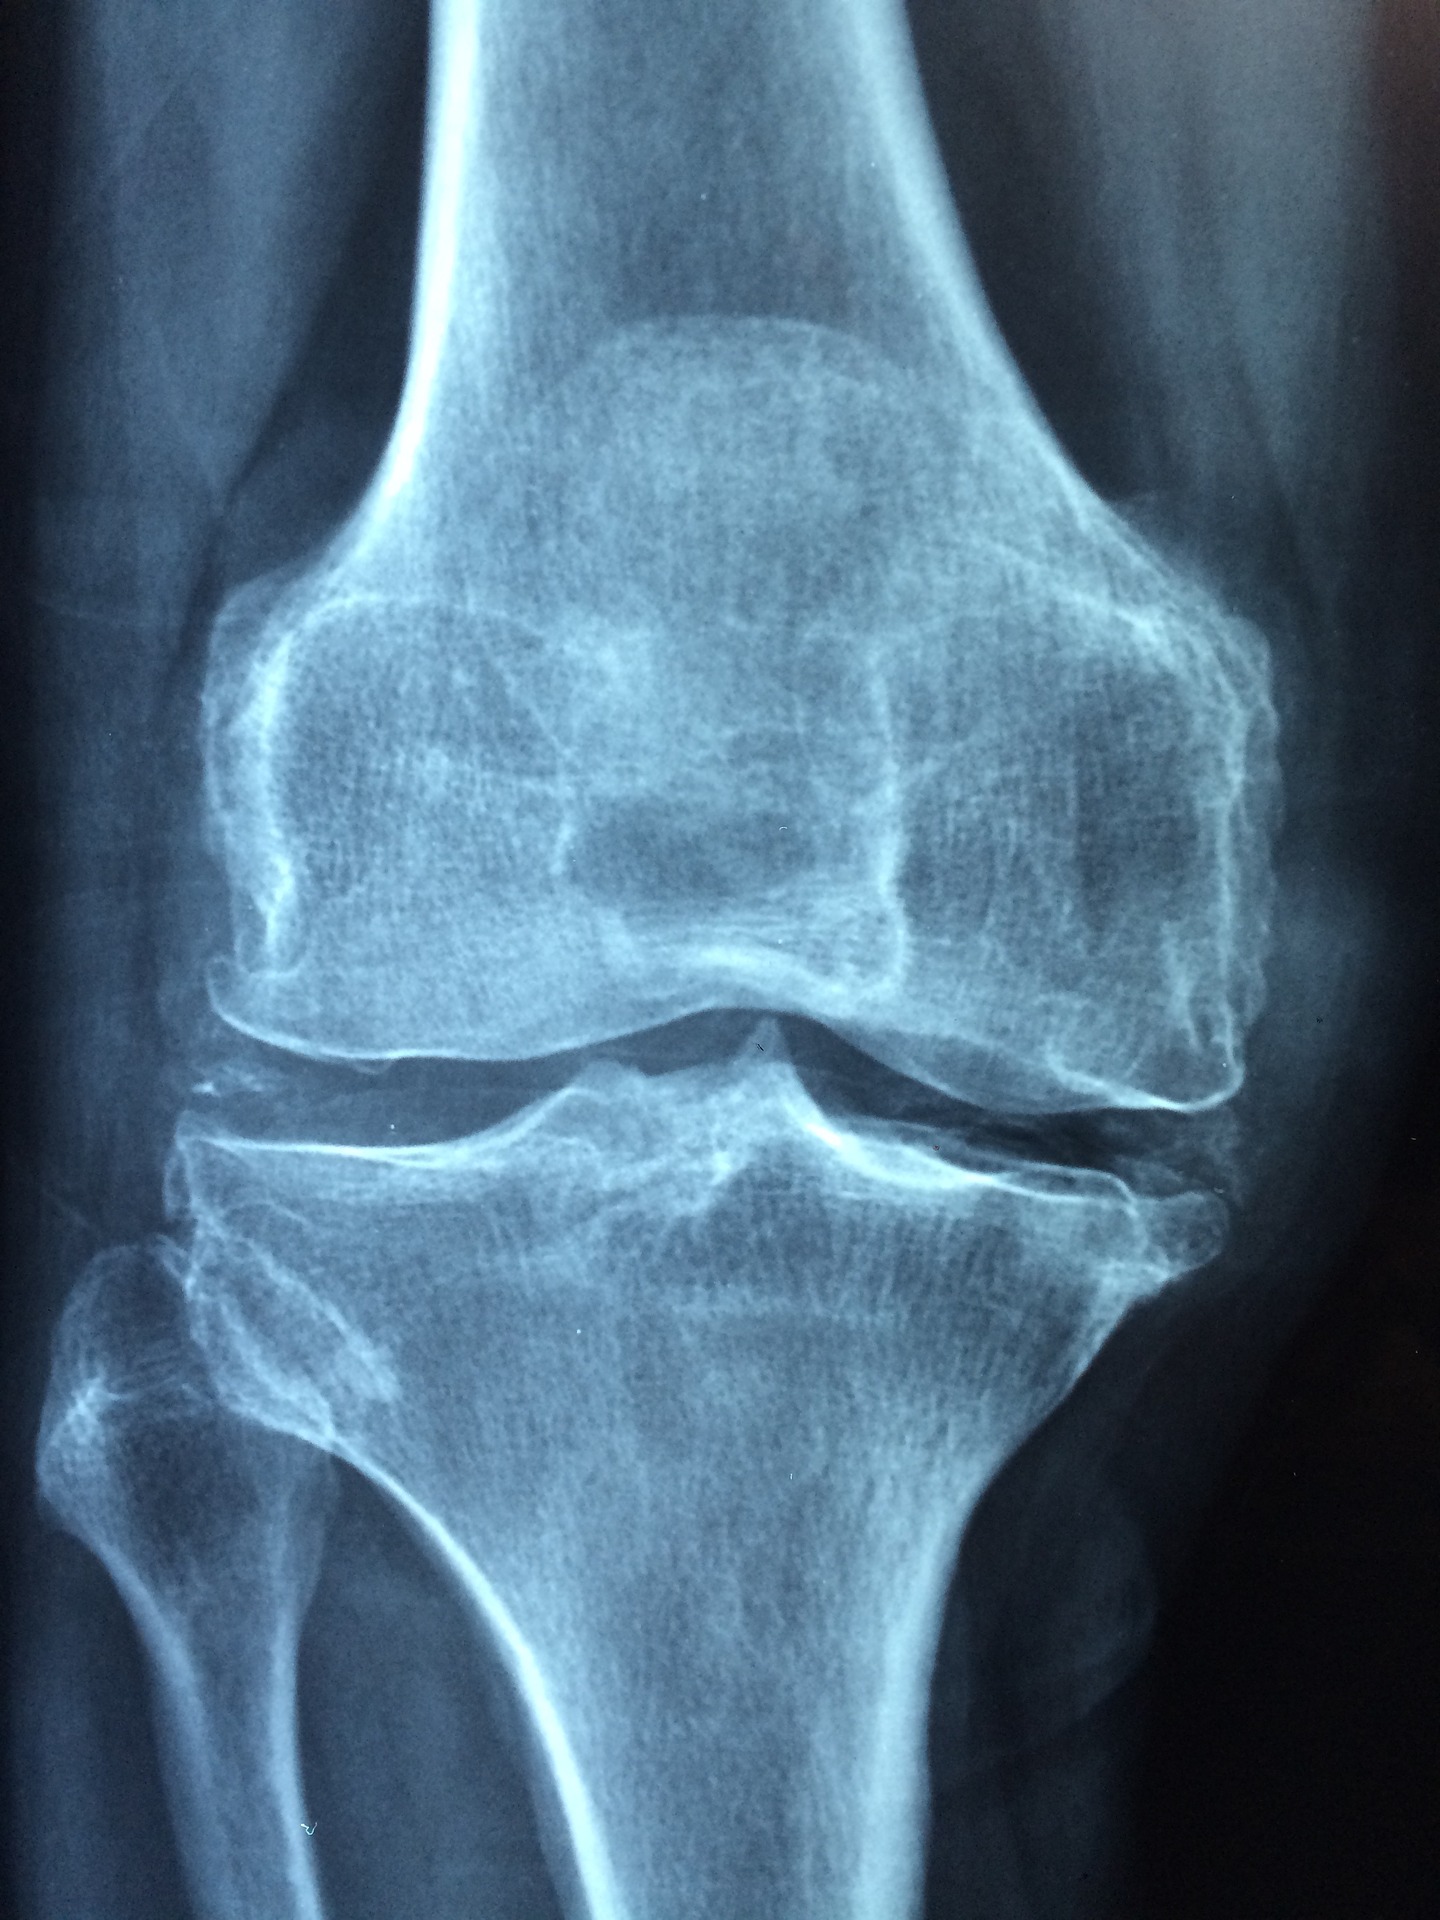 Xray image of a knee